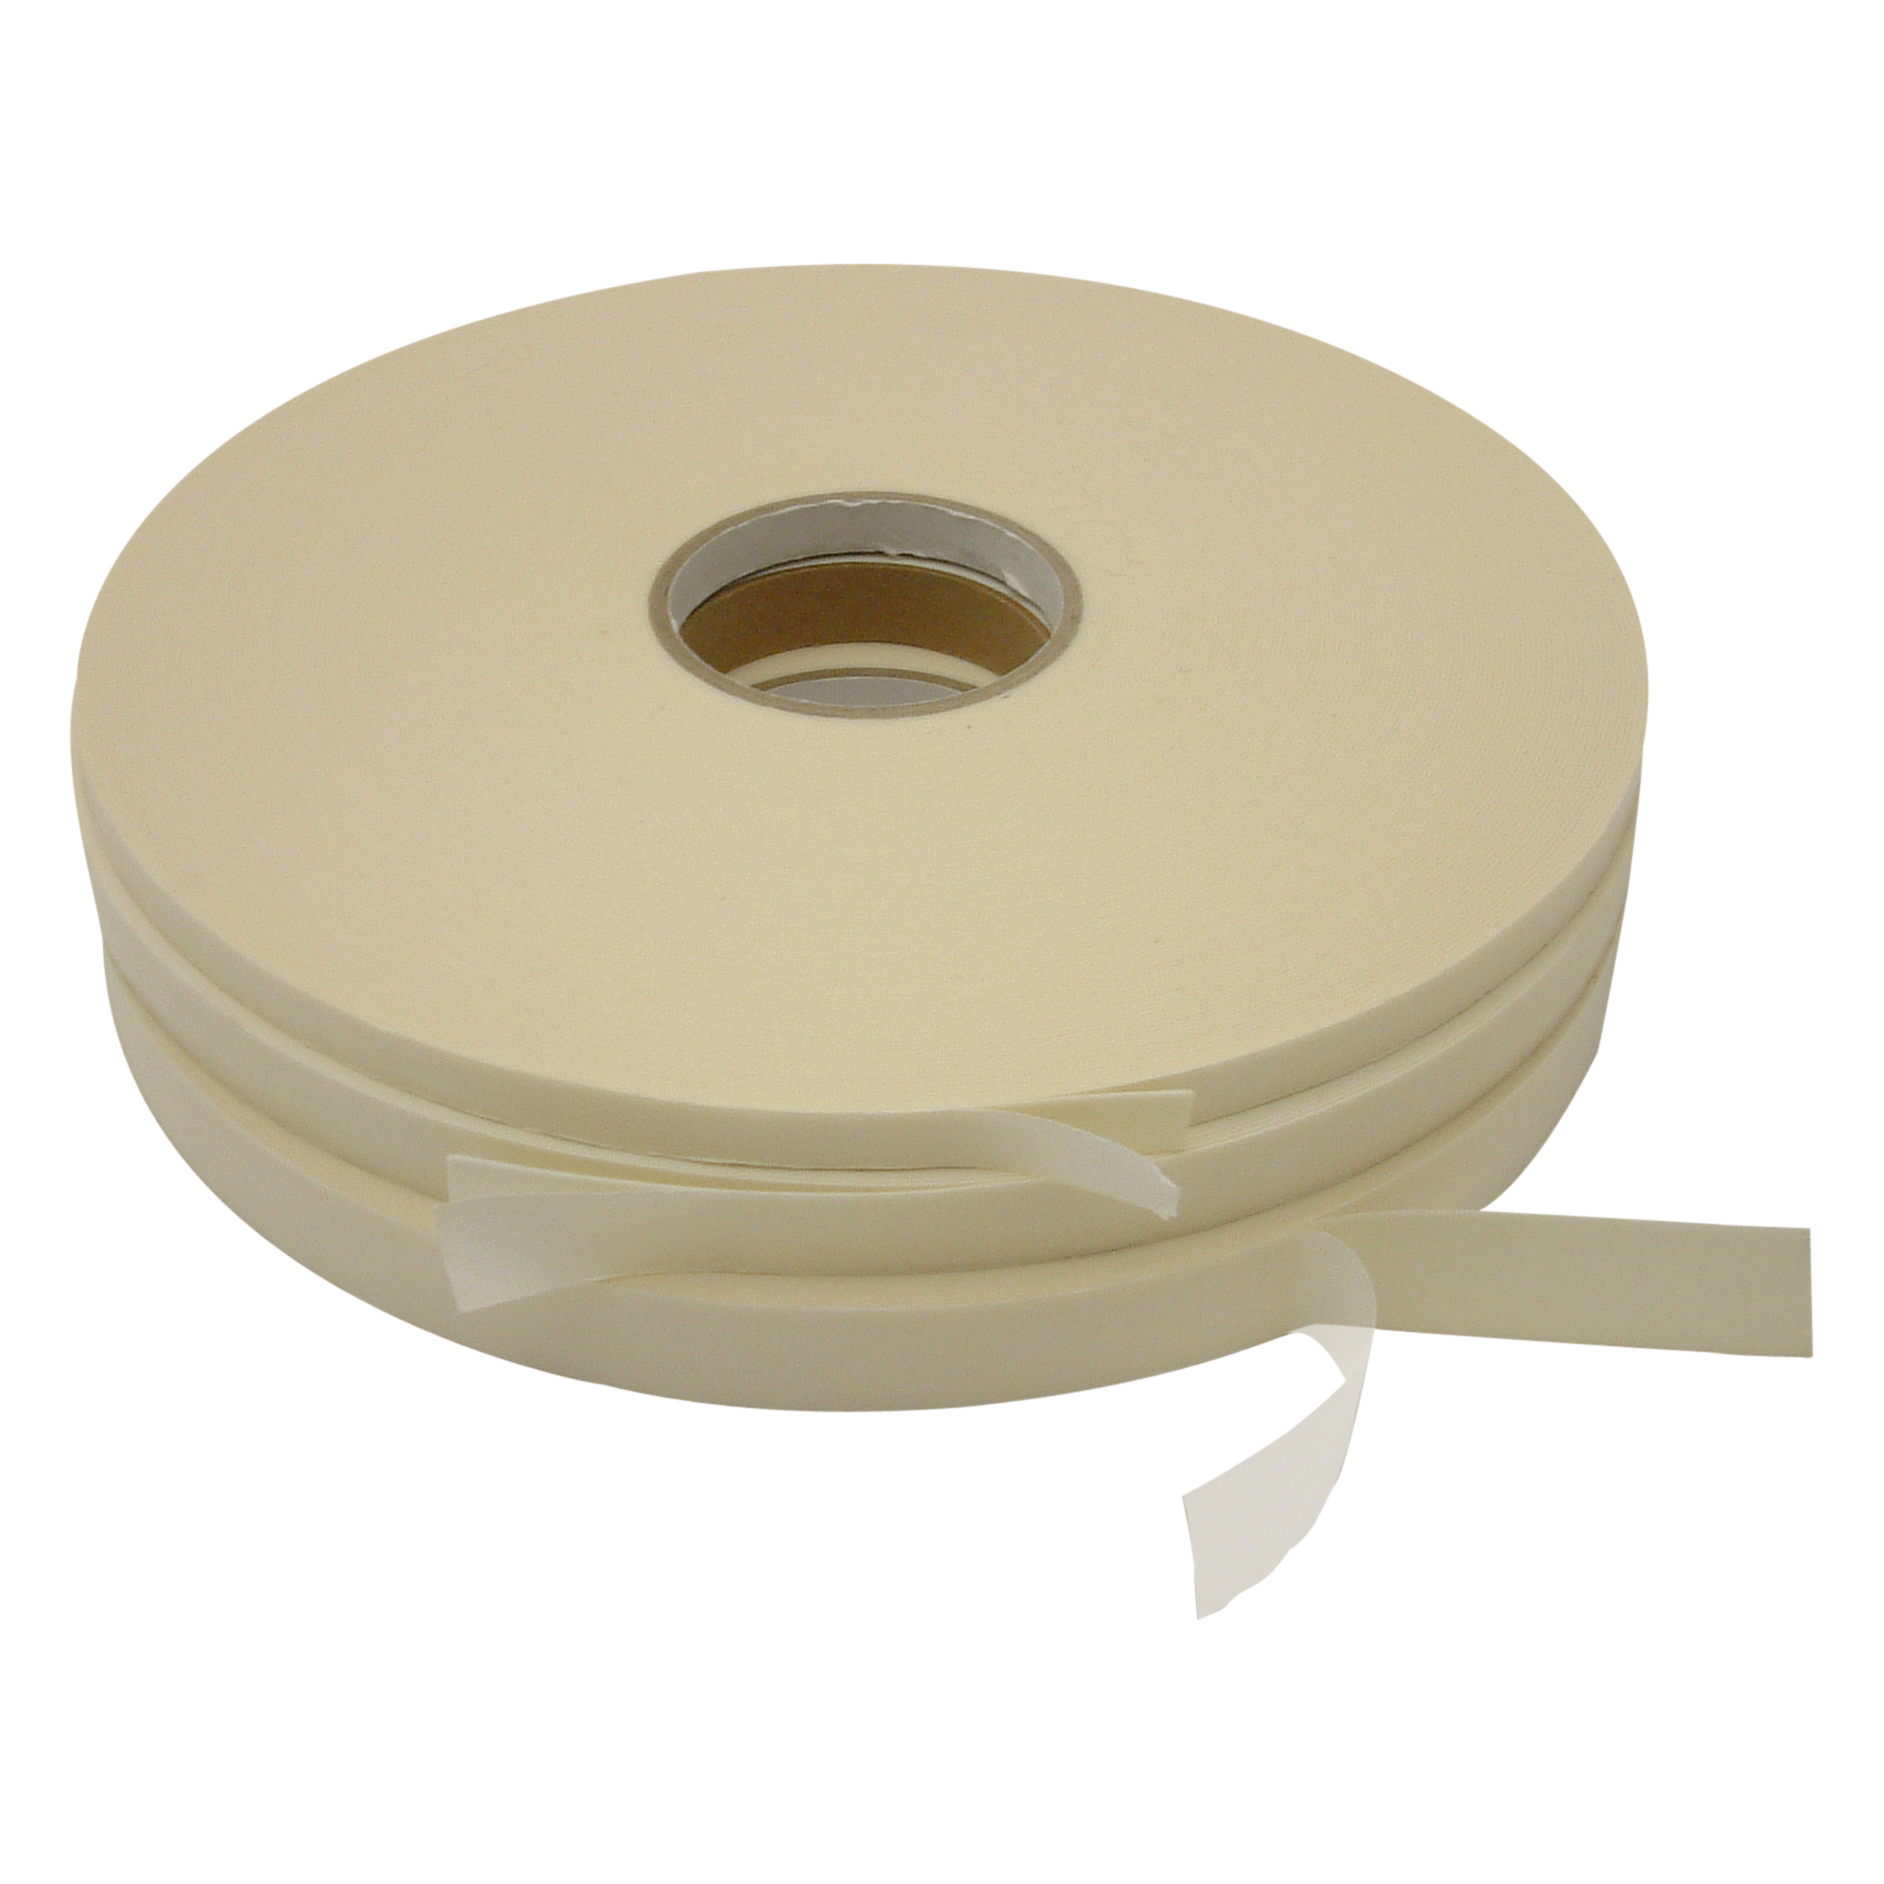 Scapa SR532V Polyethylene Foam Tape [Double-Sided, Closed Cell, 1/32 inch thick]